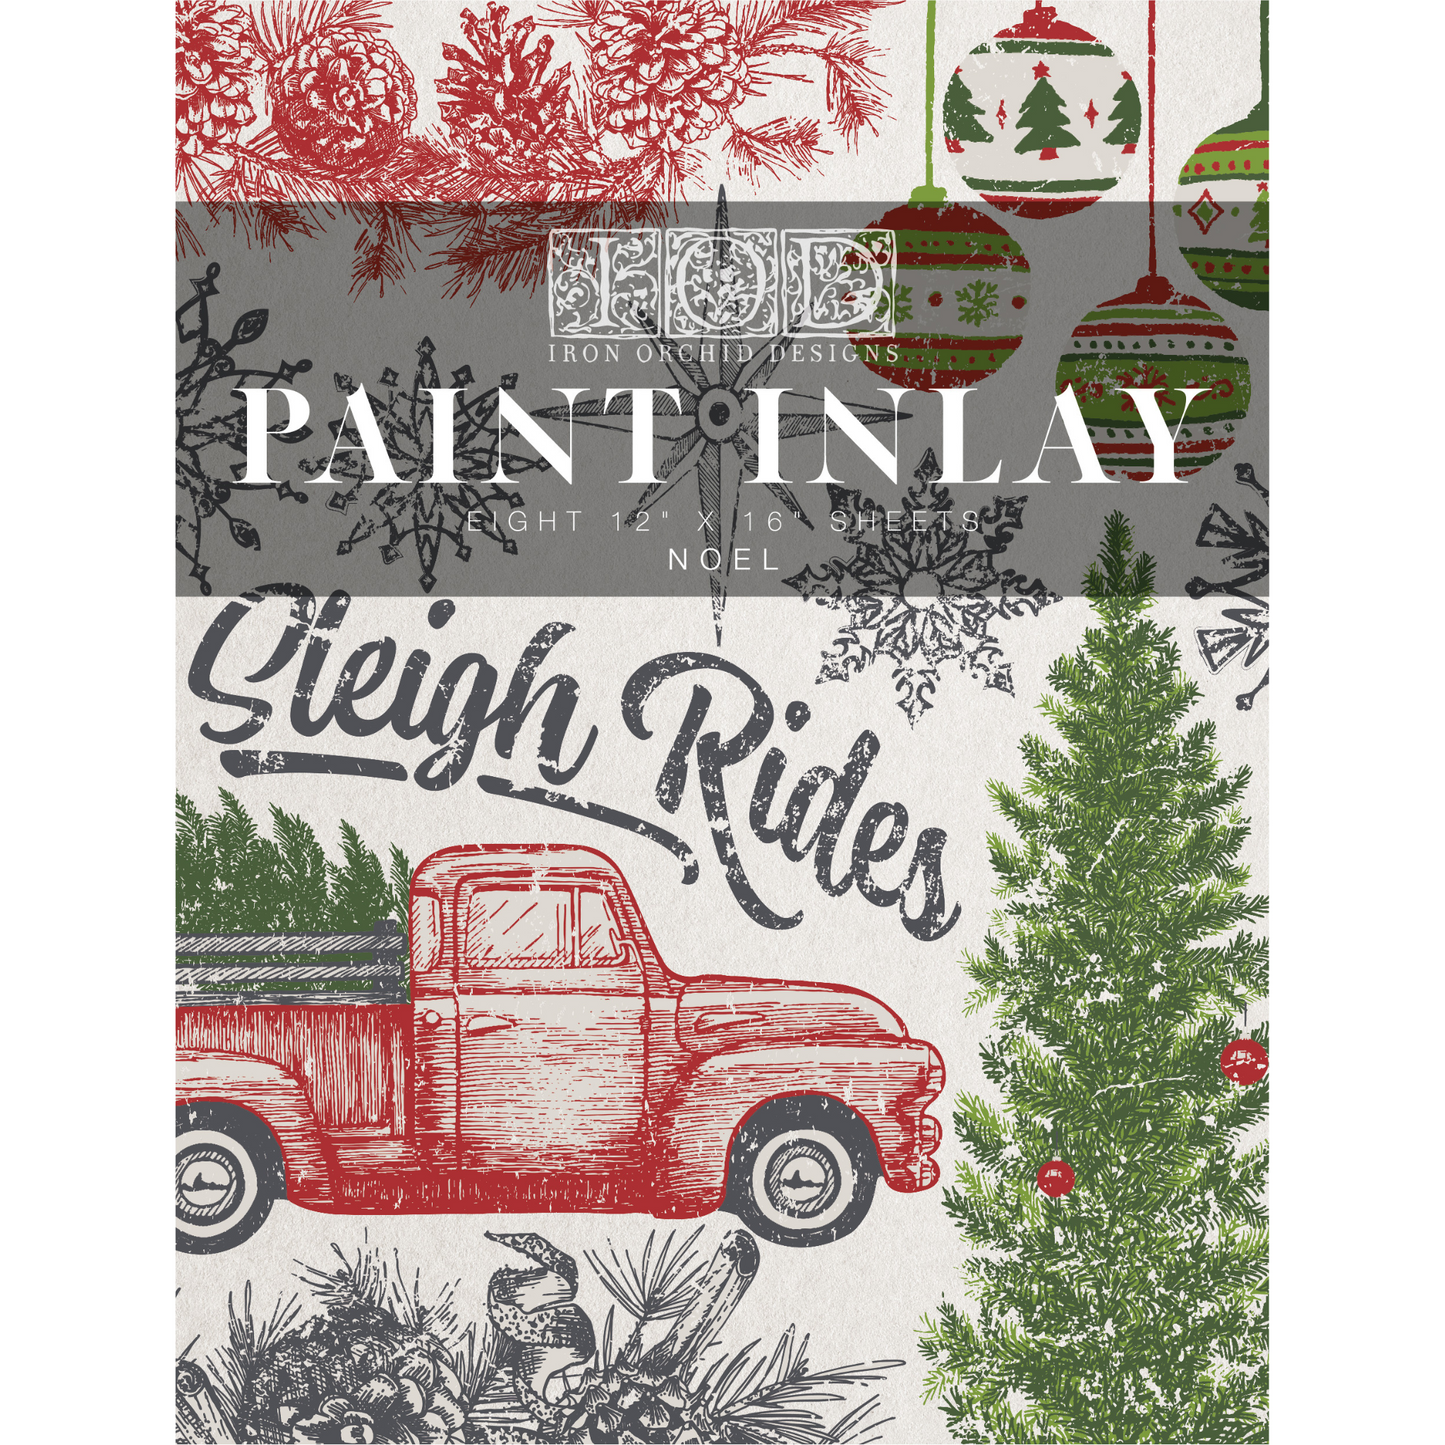 Noel IOD Paint Inlay by Iron Orchid Designs front cover.  Available at Milton's Daughter.